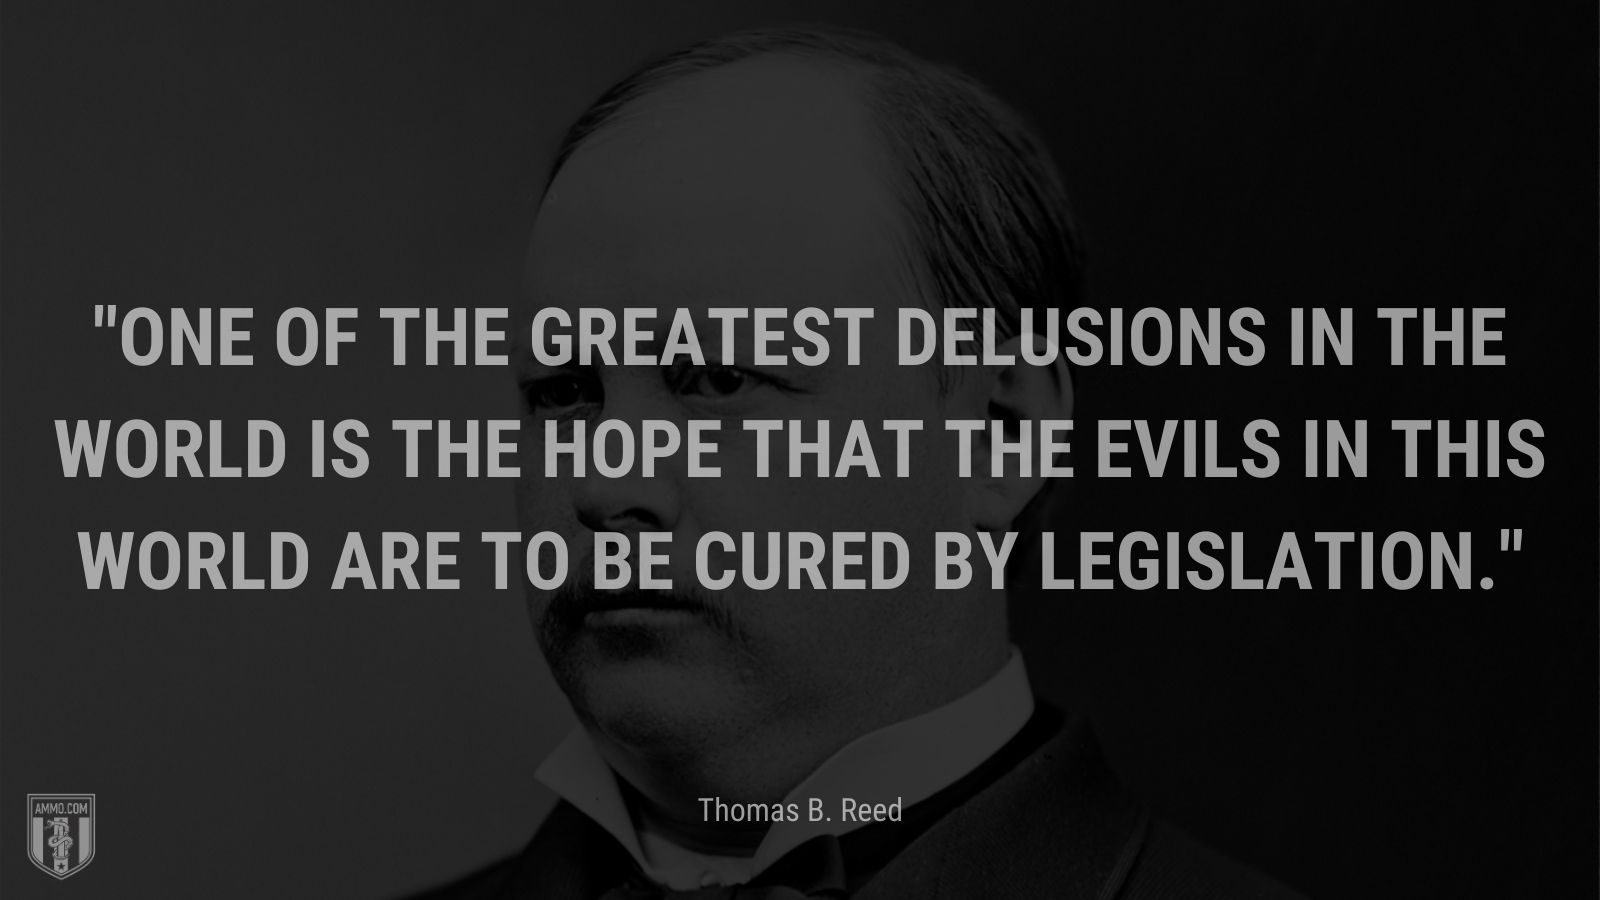 “One of the greatest delusions in the world is the hope that the evils in this world are to be cured by legislation. - Thomas B. Reed